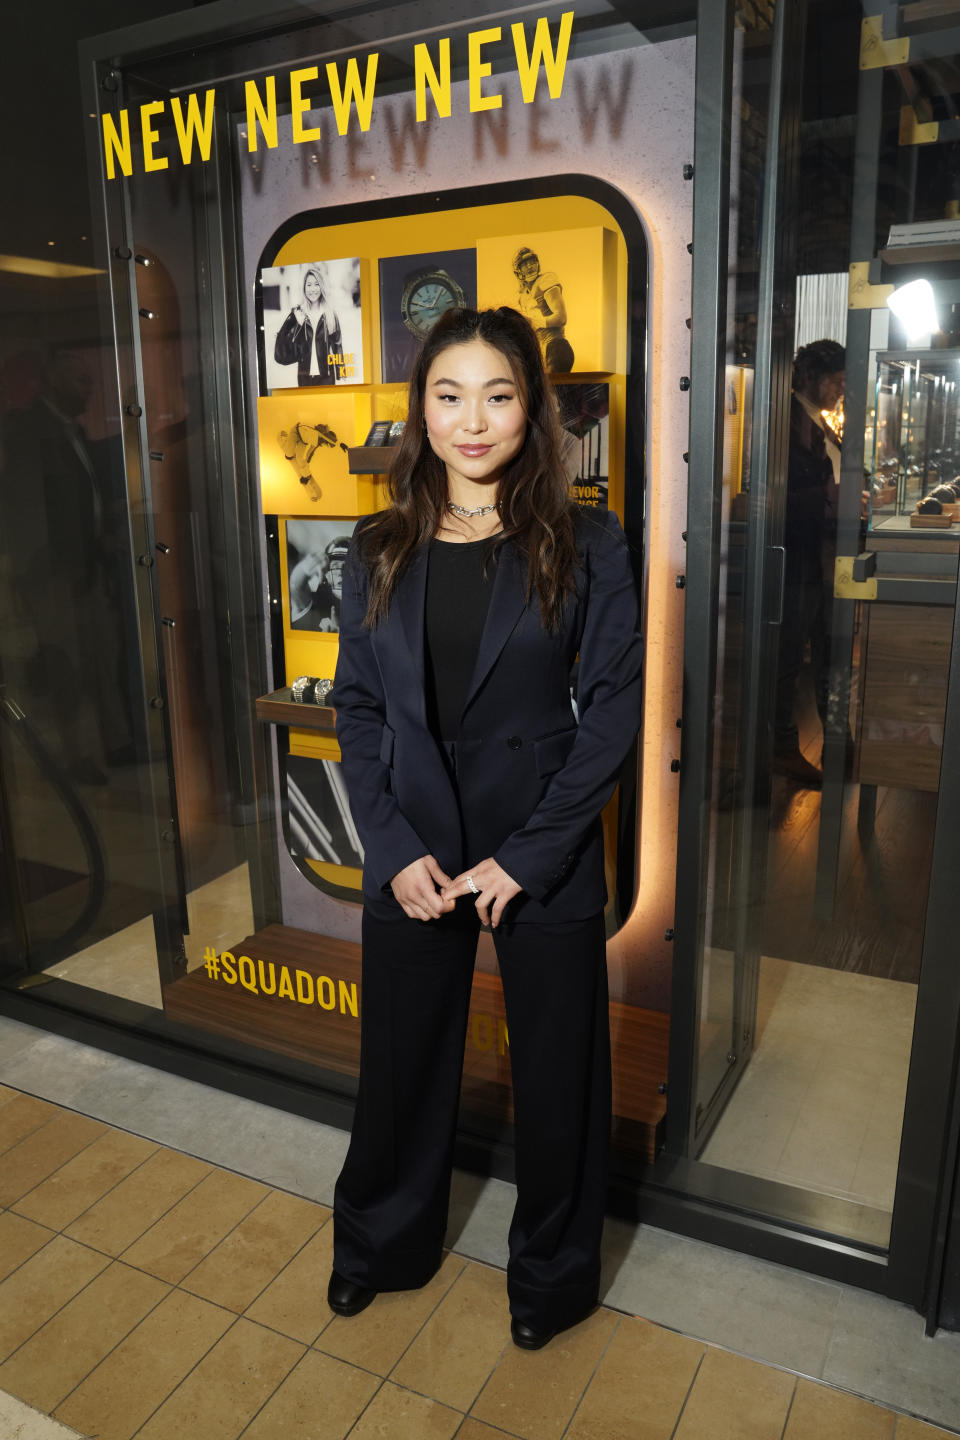 COSTA MESA, CALIFORNIA - MARCH 23: Chloe Kim, Breitling Ambassador, attends Breitling Boutique Costa Grand Opening With Ambassador Chloe Kim at South Coast Plaza on March 23, 2023 in Costa Mesa, California. (Photo by Presley Ann/Getty Images for Breitling)